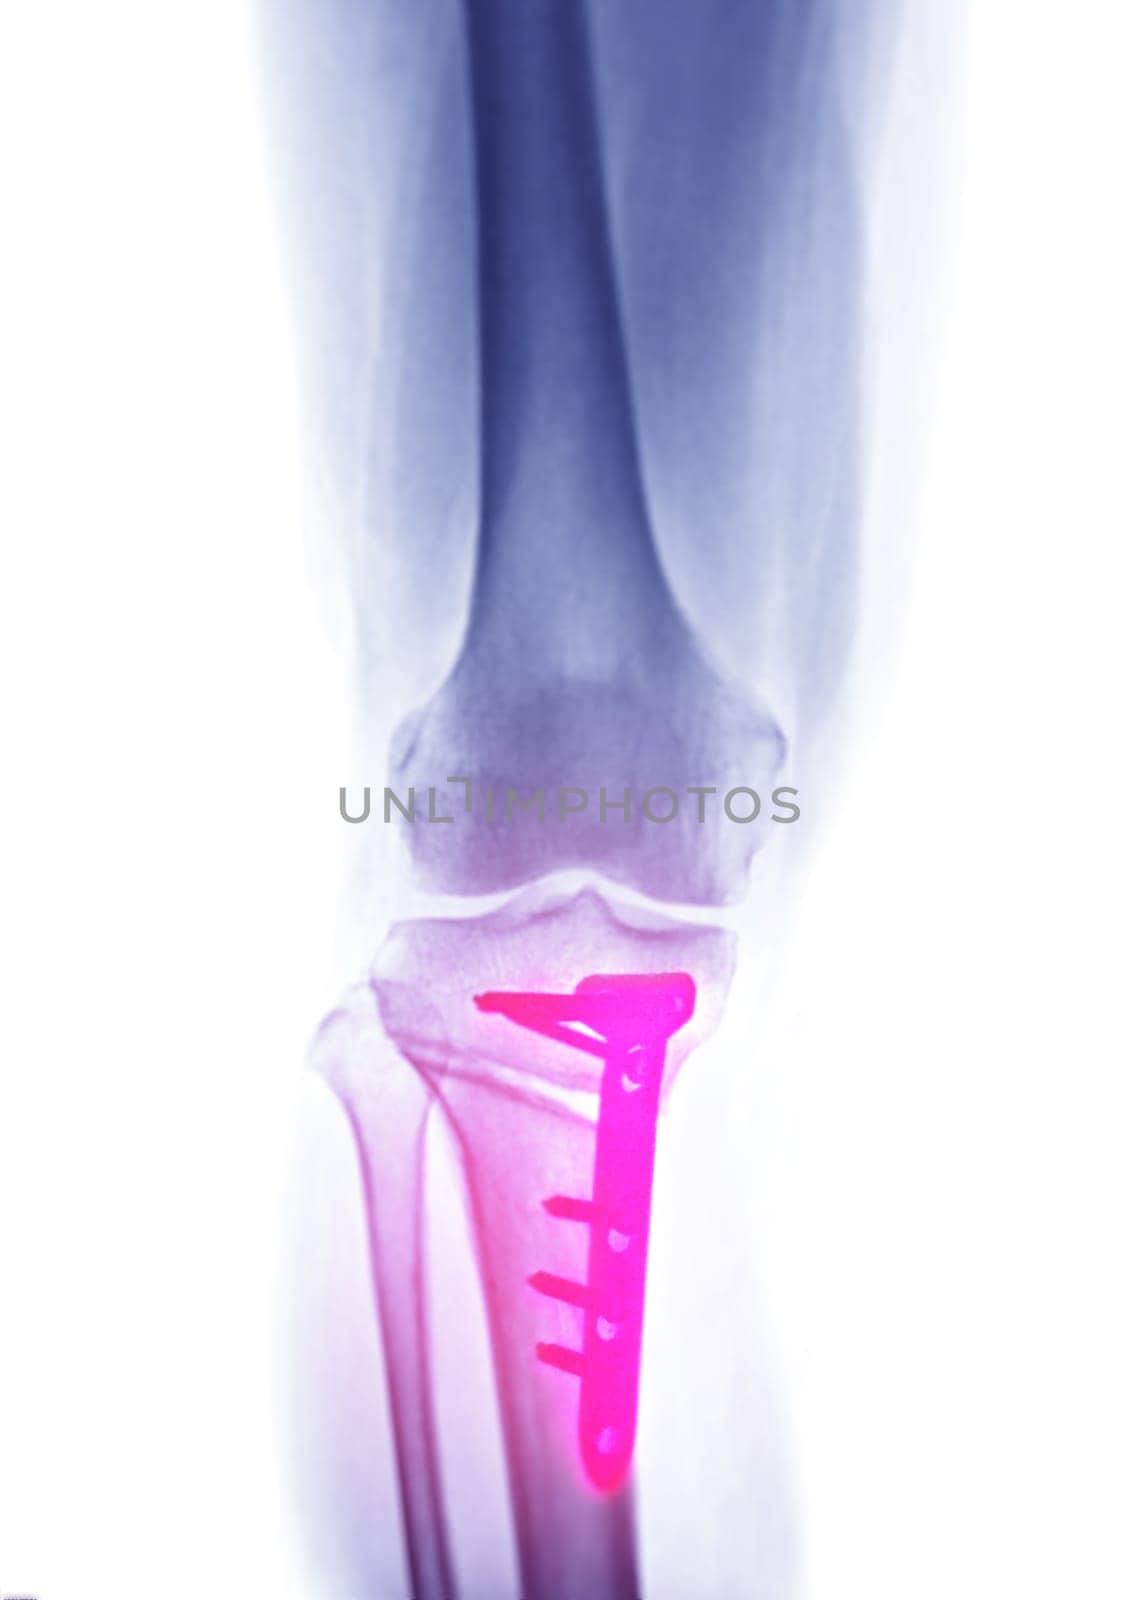 X-ray image of  Right knee  AP  view showing Total knee arthroplasty and fractures of the tibial plateau with plate and screw fixation.